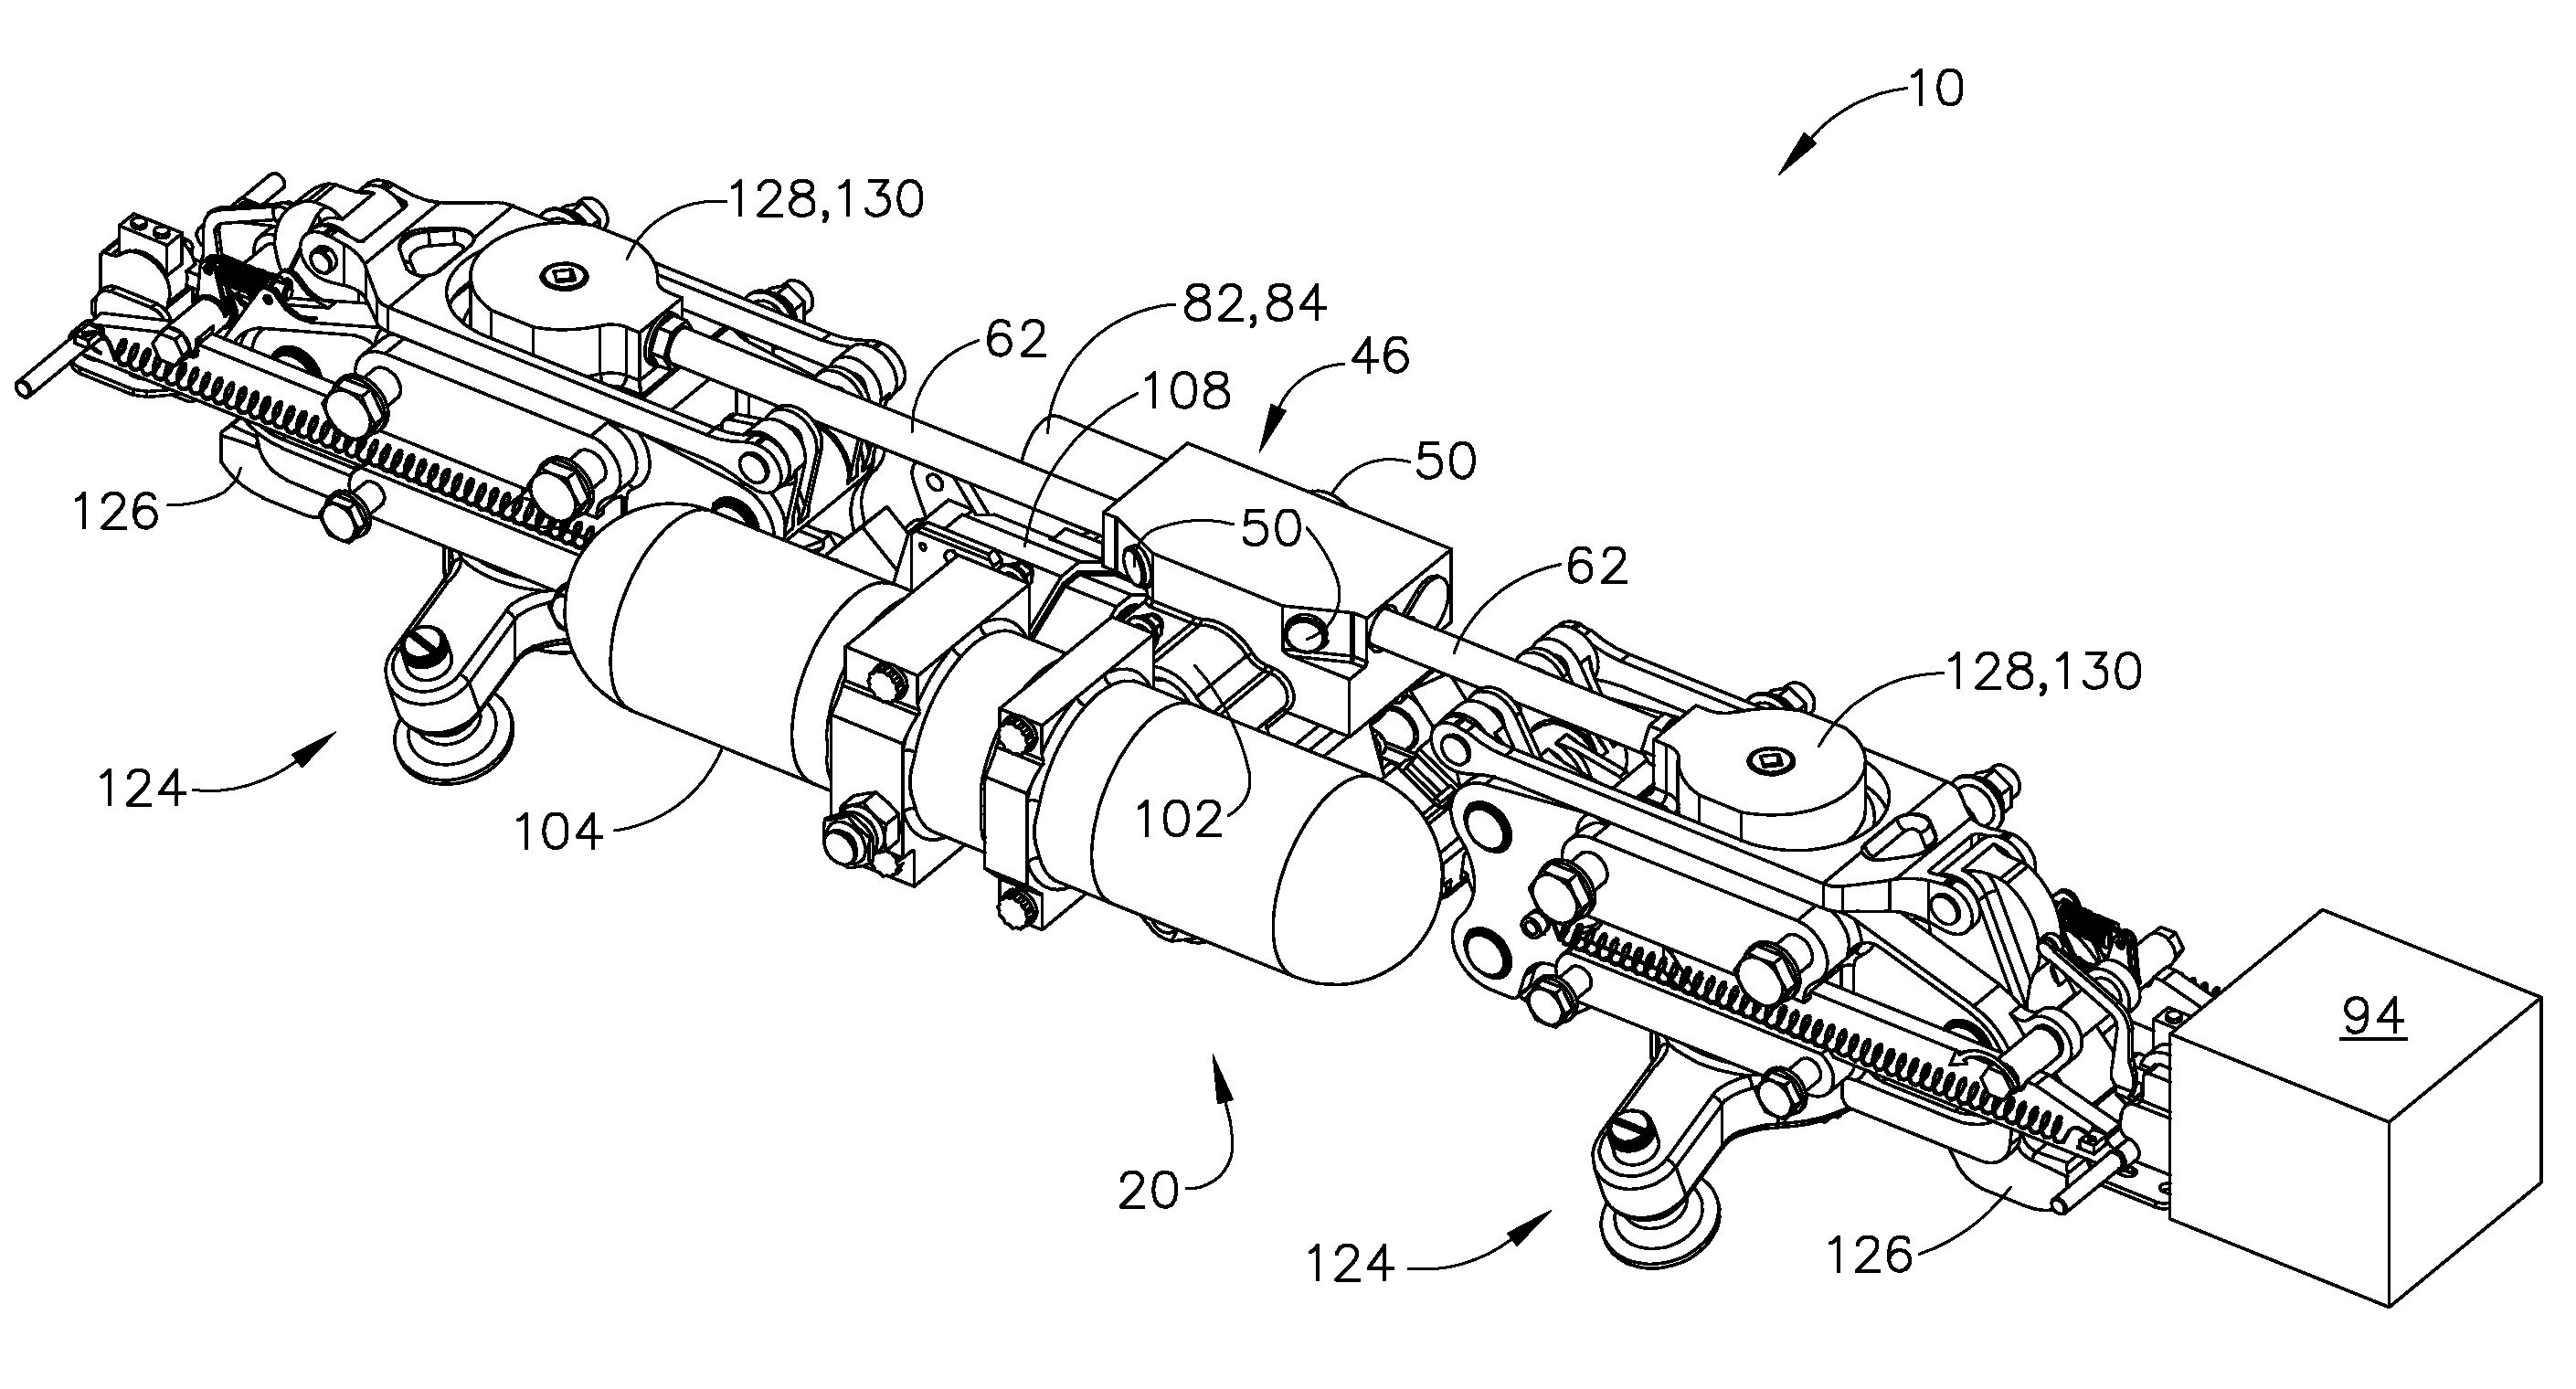 System and Method for In-Flight Adjustment of Store Ejector Gas Flow Orificing